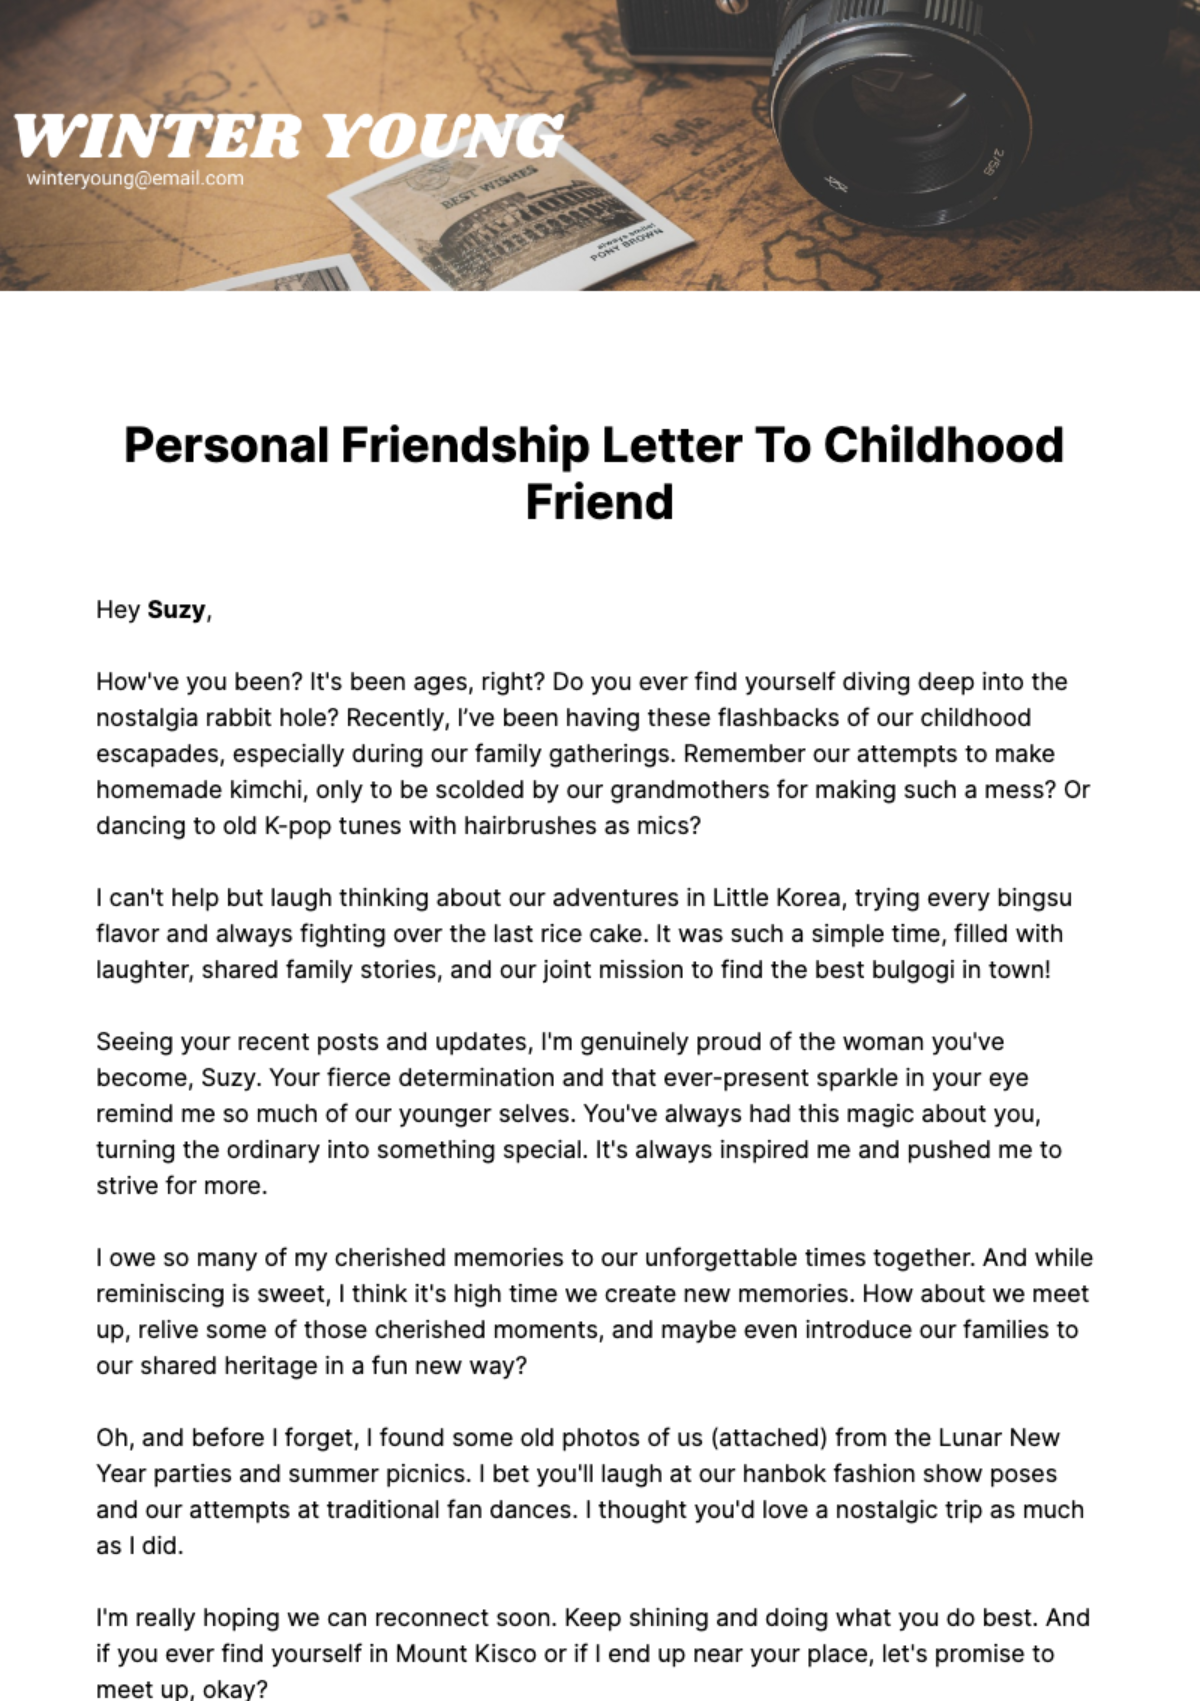 Free Personal Friendship Letter to Childhood Friend  Template